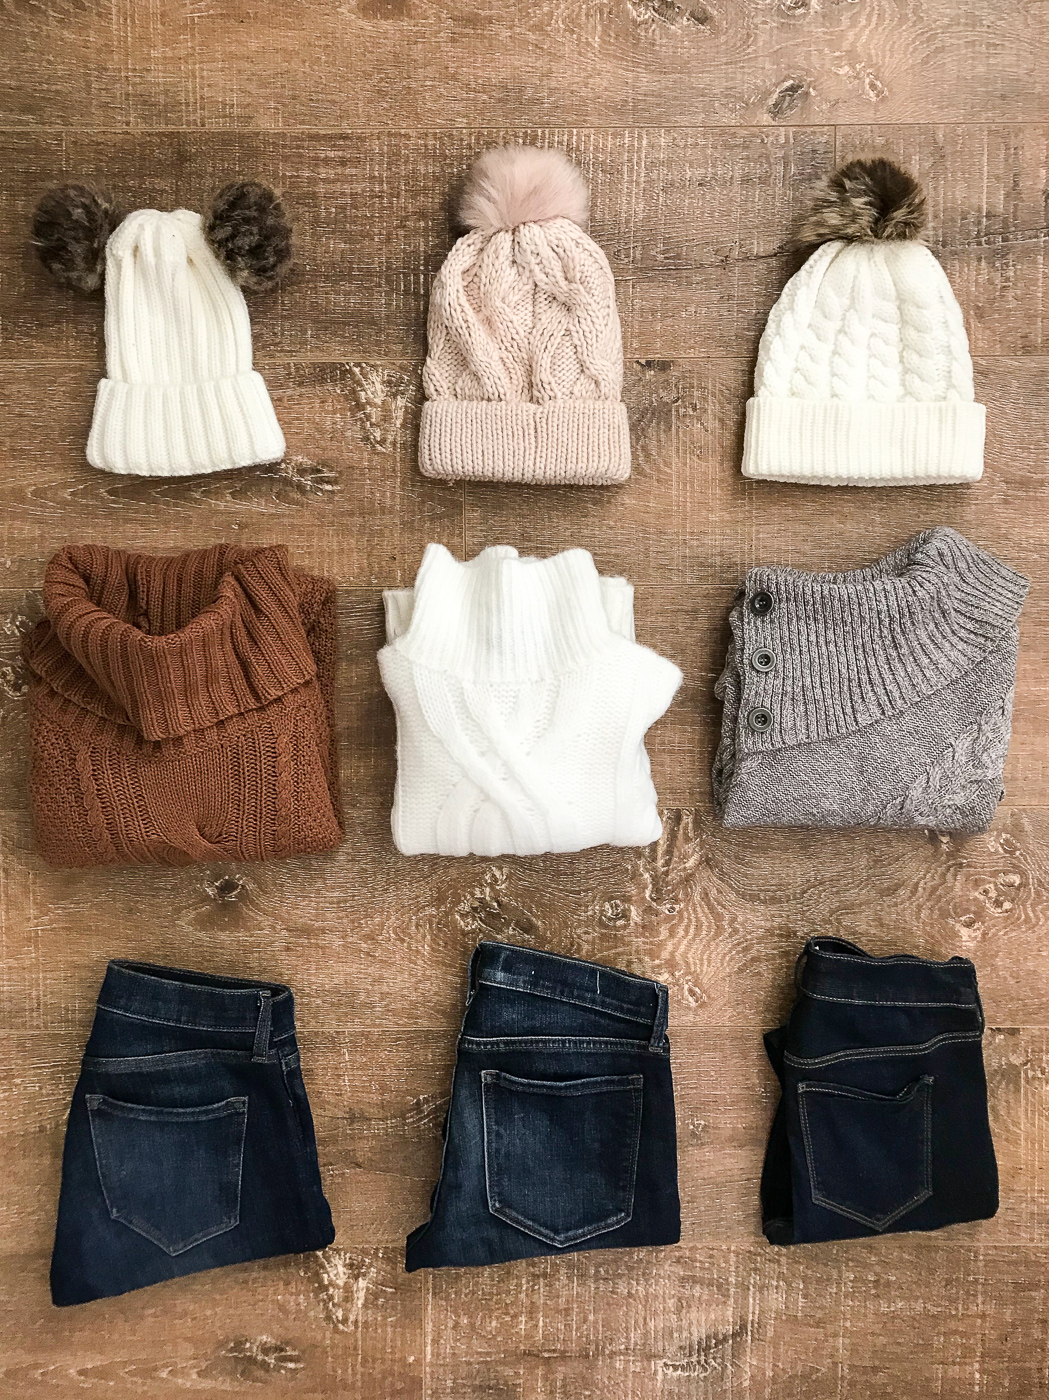 cable knit sweaters beanies skinny jeans petite fall outfit ideas